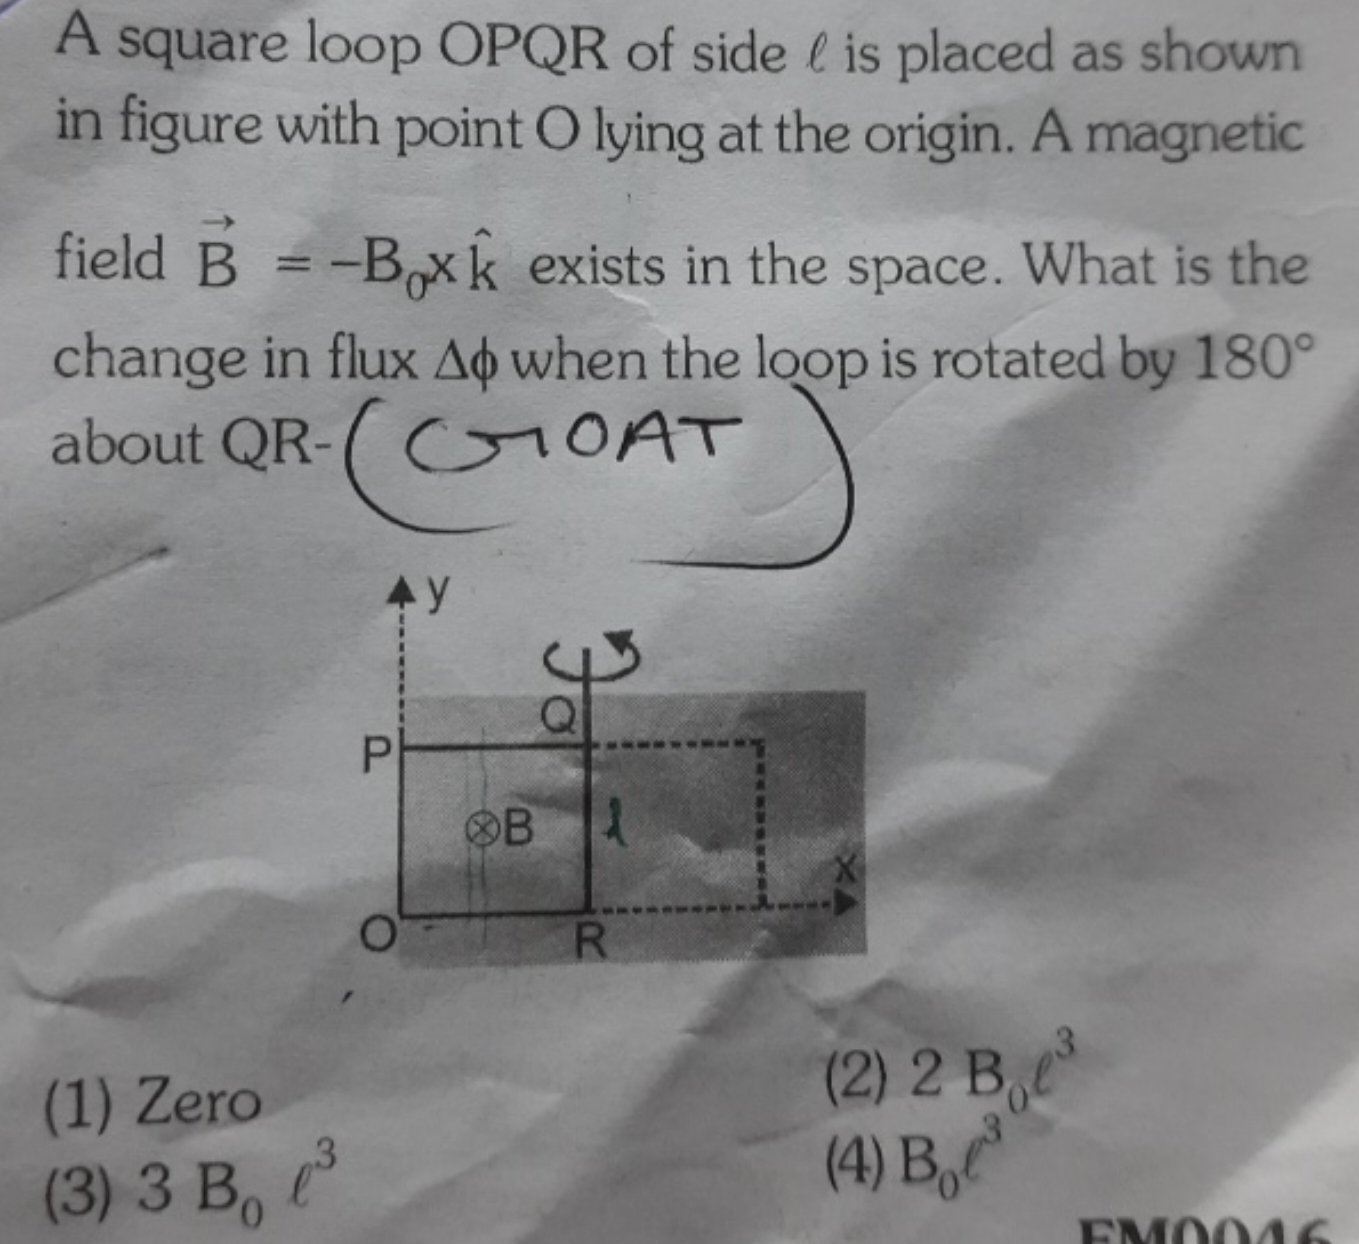 A square loop OPQR of side ℓ is placed as shown in figure with point O